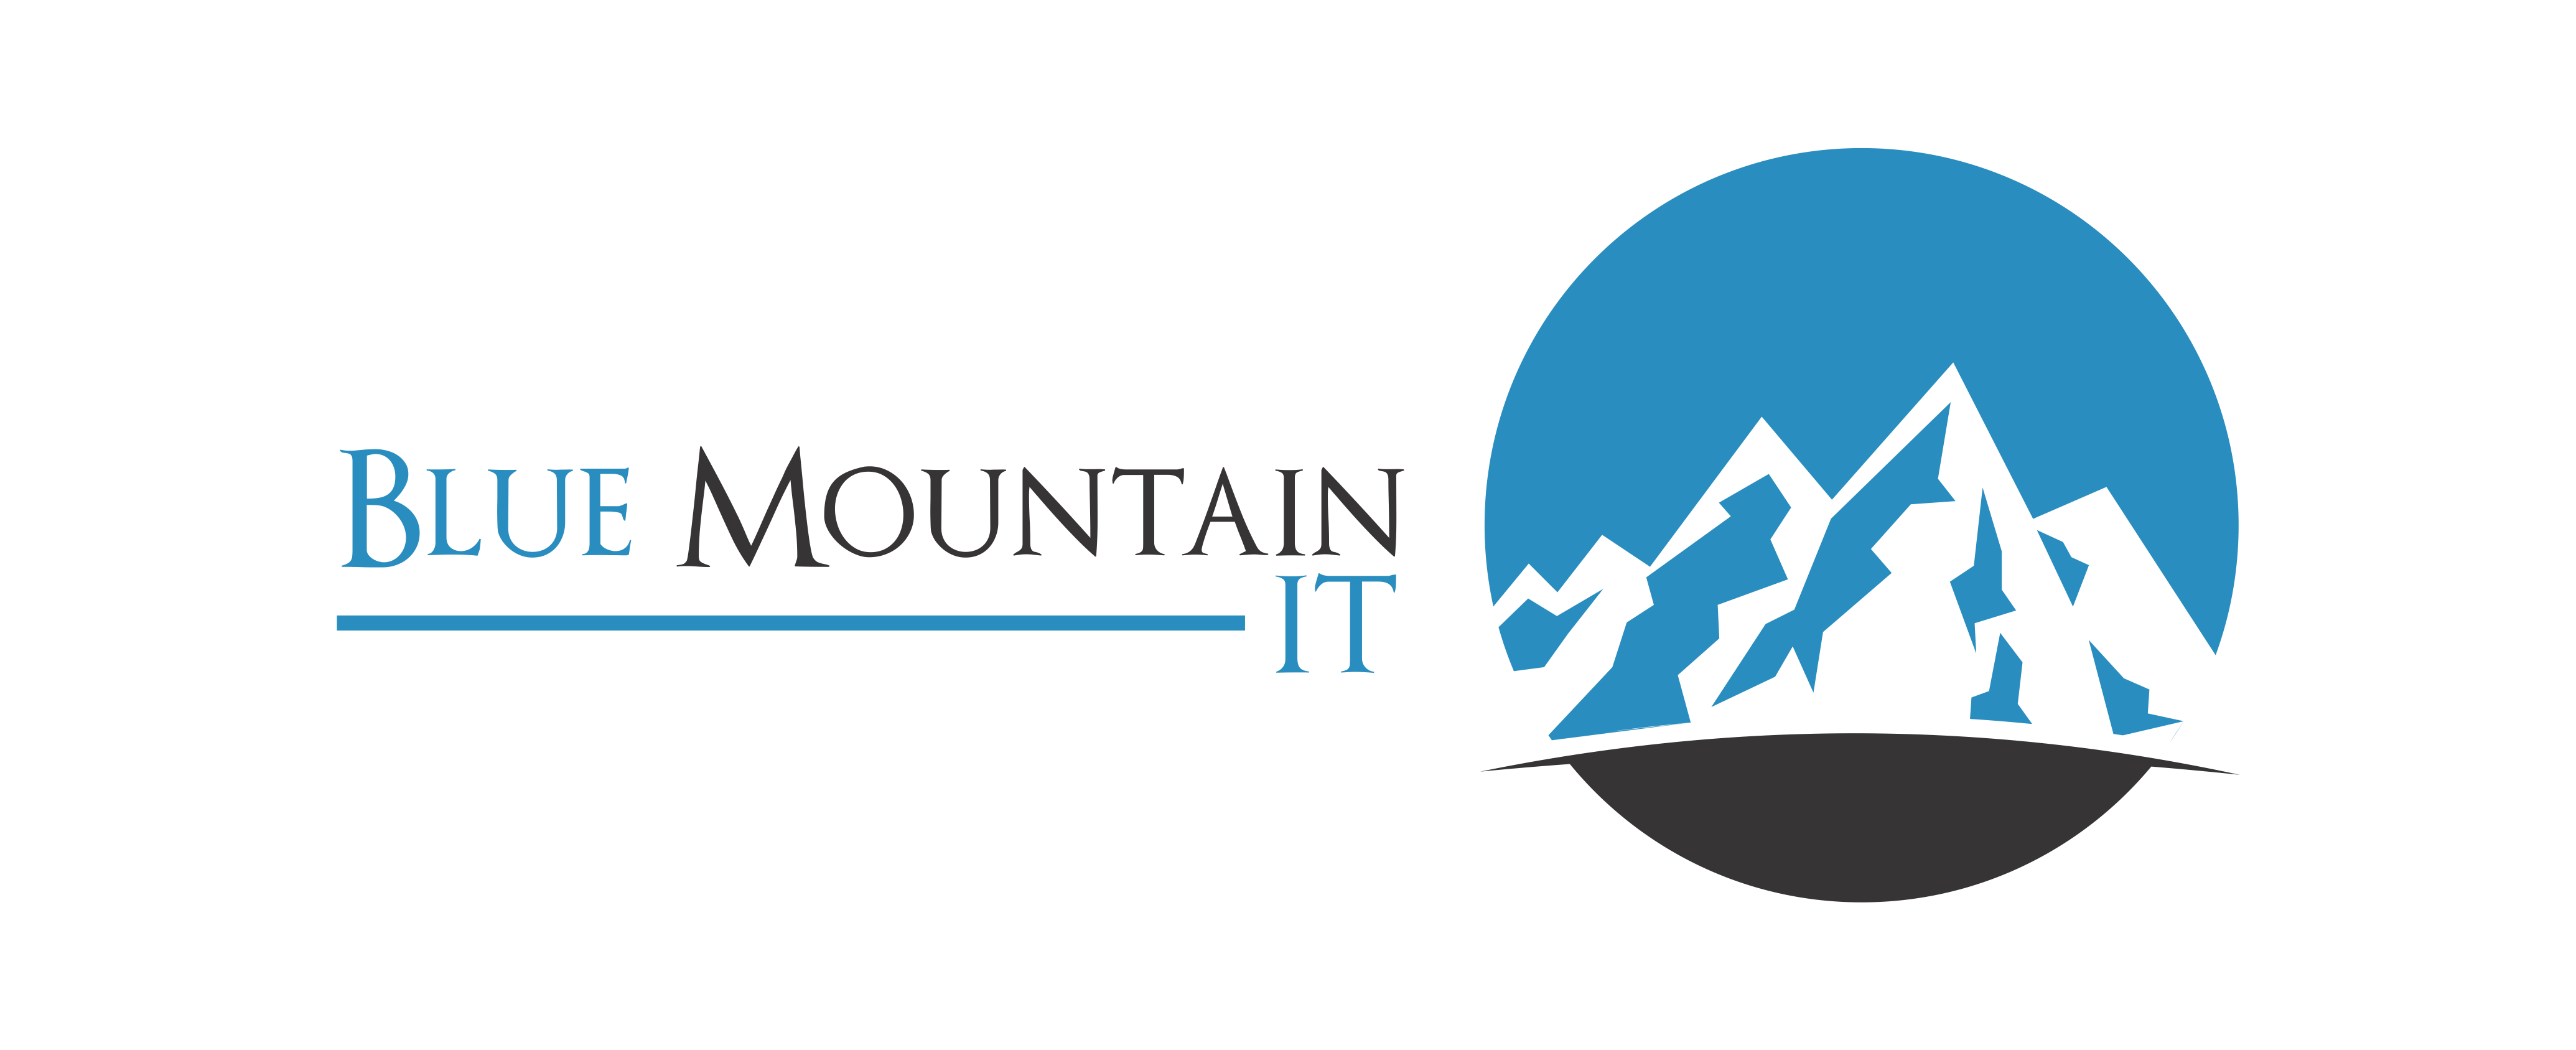 Blue Mountain Logo - Blue Mountain IT | Your IT solutions partner